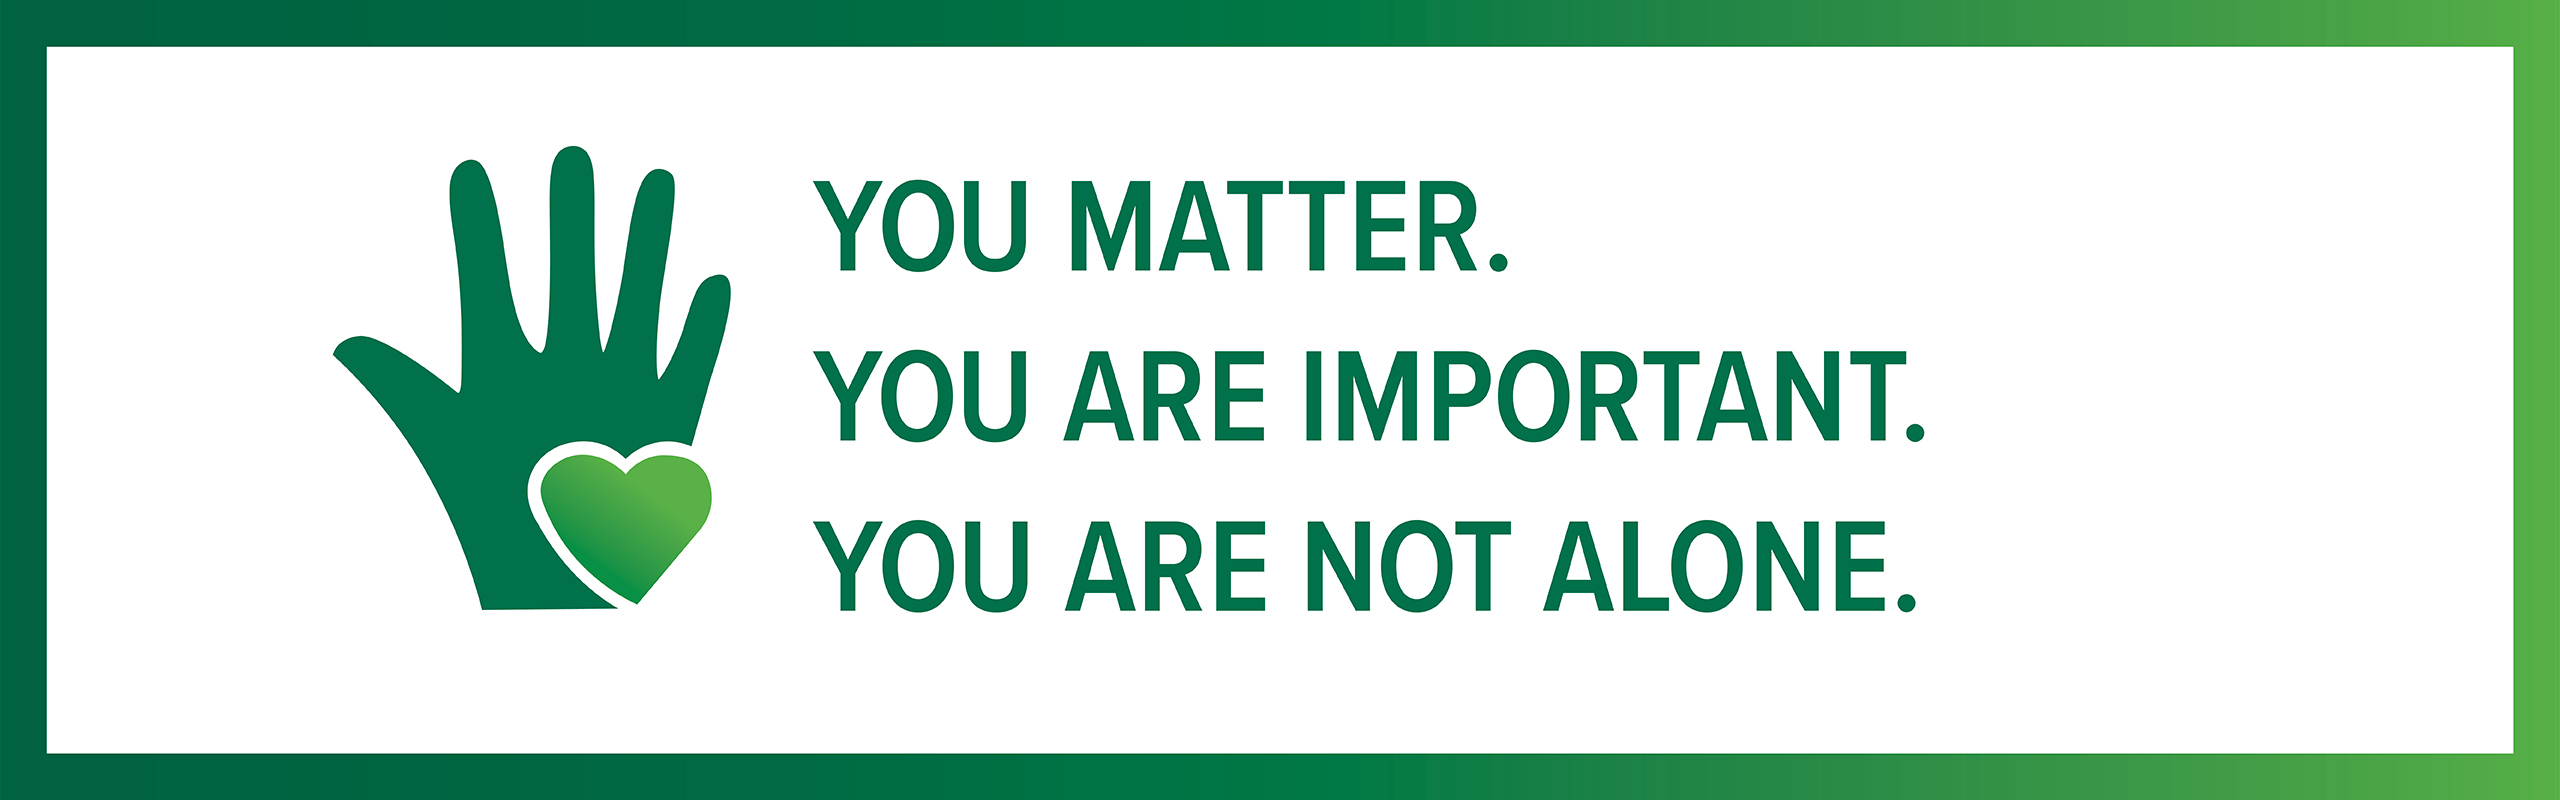 You Matter. You are important. You are not alone.